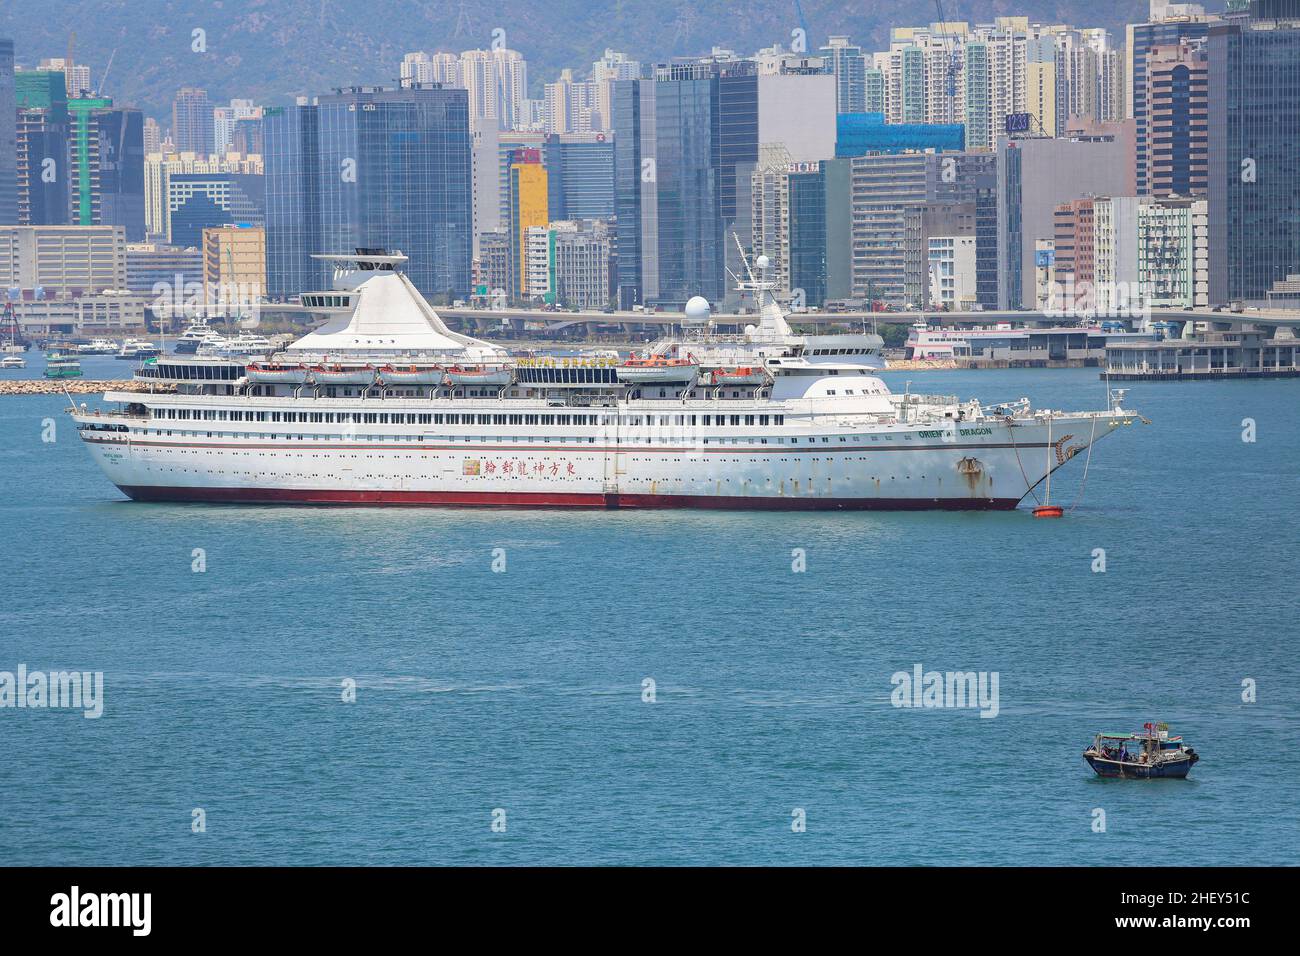 Cruise ship 'Oriental Dragon' in Hong Kong, South China, high-rise residential buildings, hills, floating casino vessel, cruises,passenger ships image Stock Photo